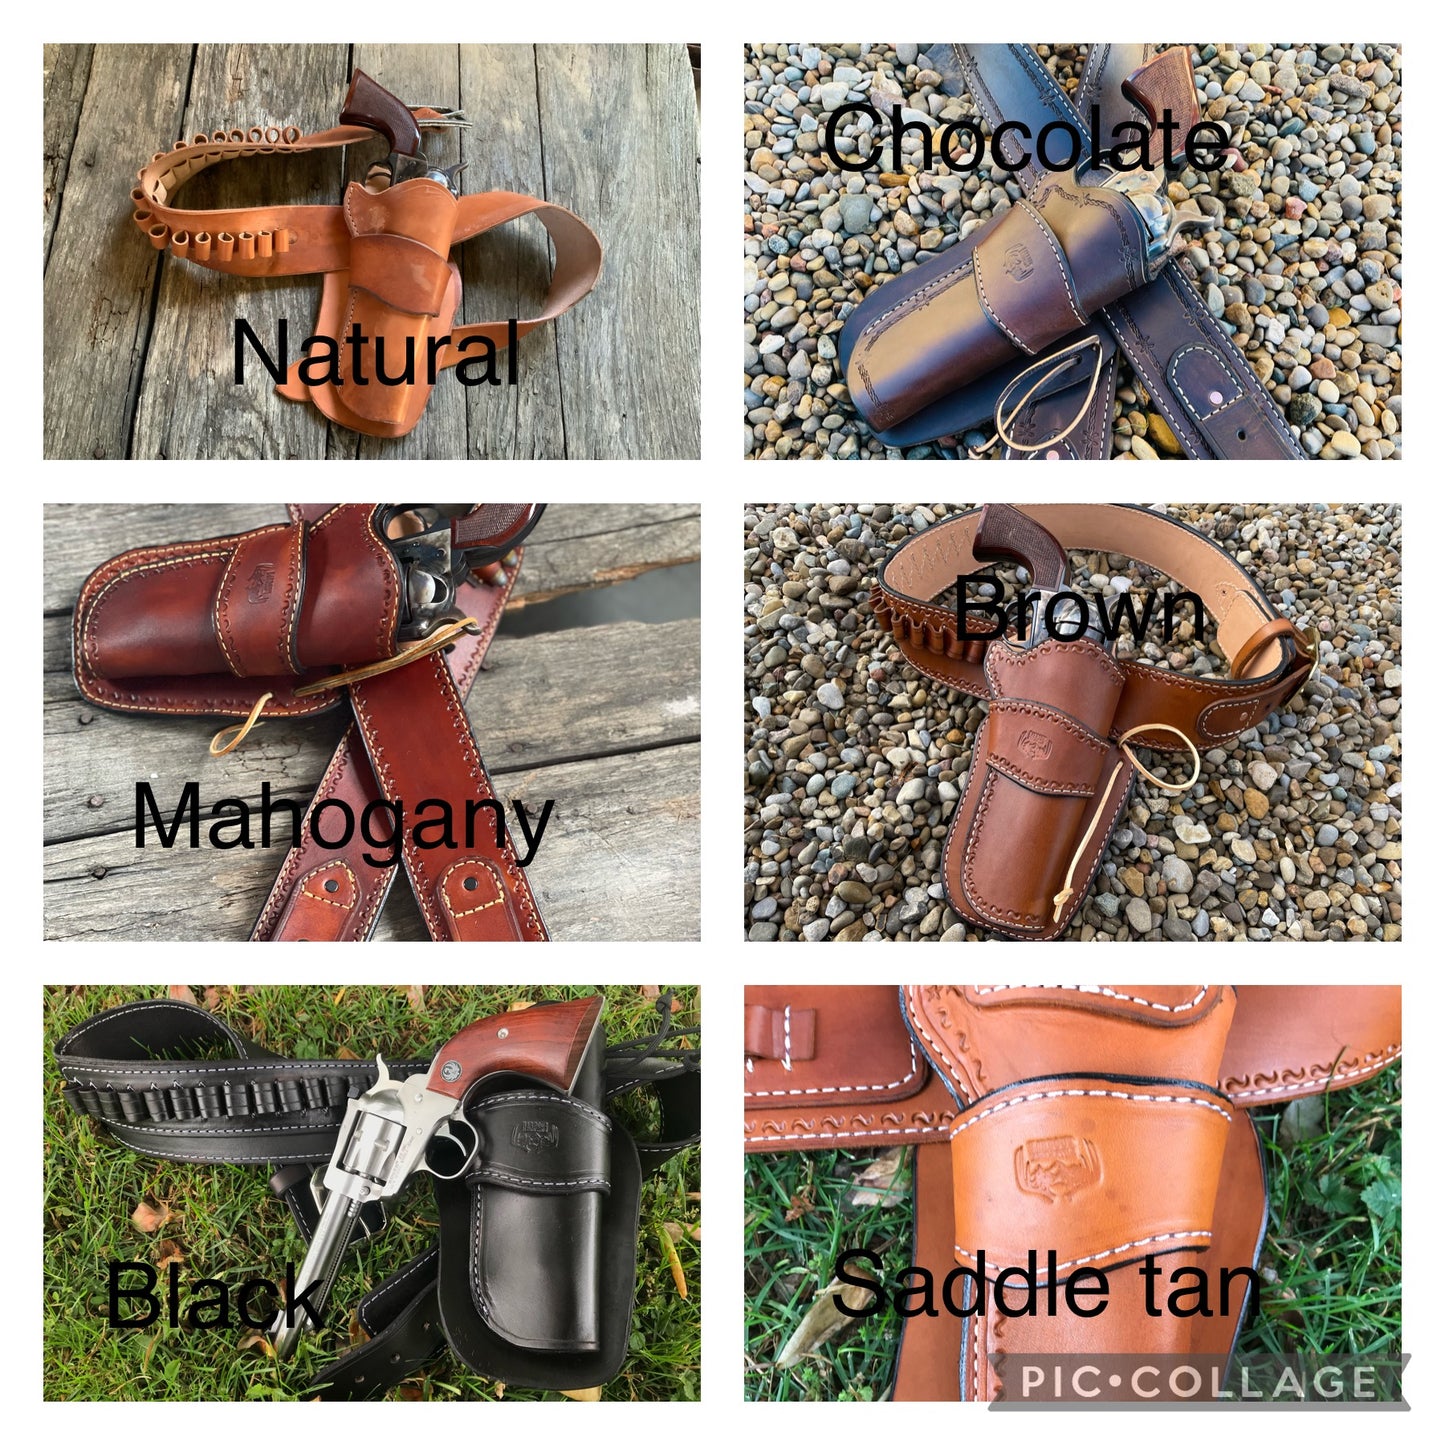 Leather Shoulder Holster - handmade leather holster in a variety